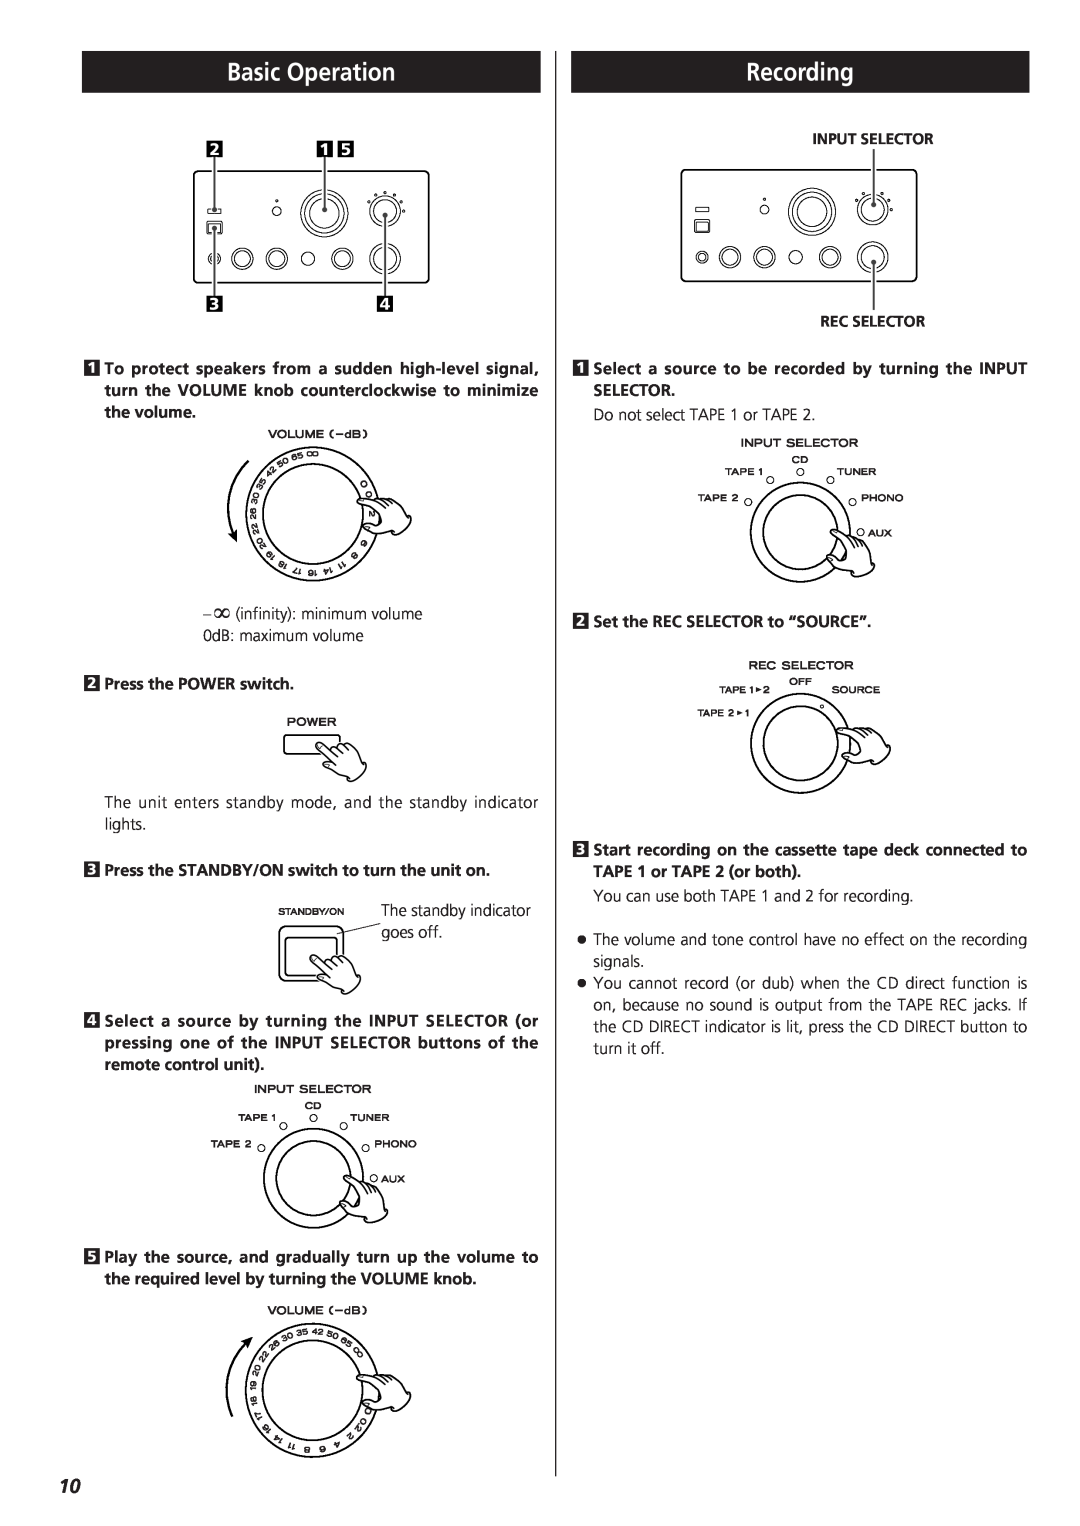 Teac A-H300mkII owner manual Basic Operation, Recording 